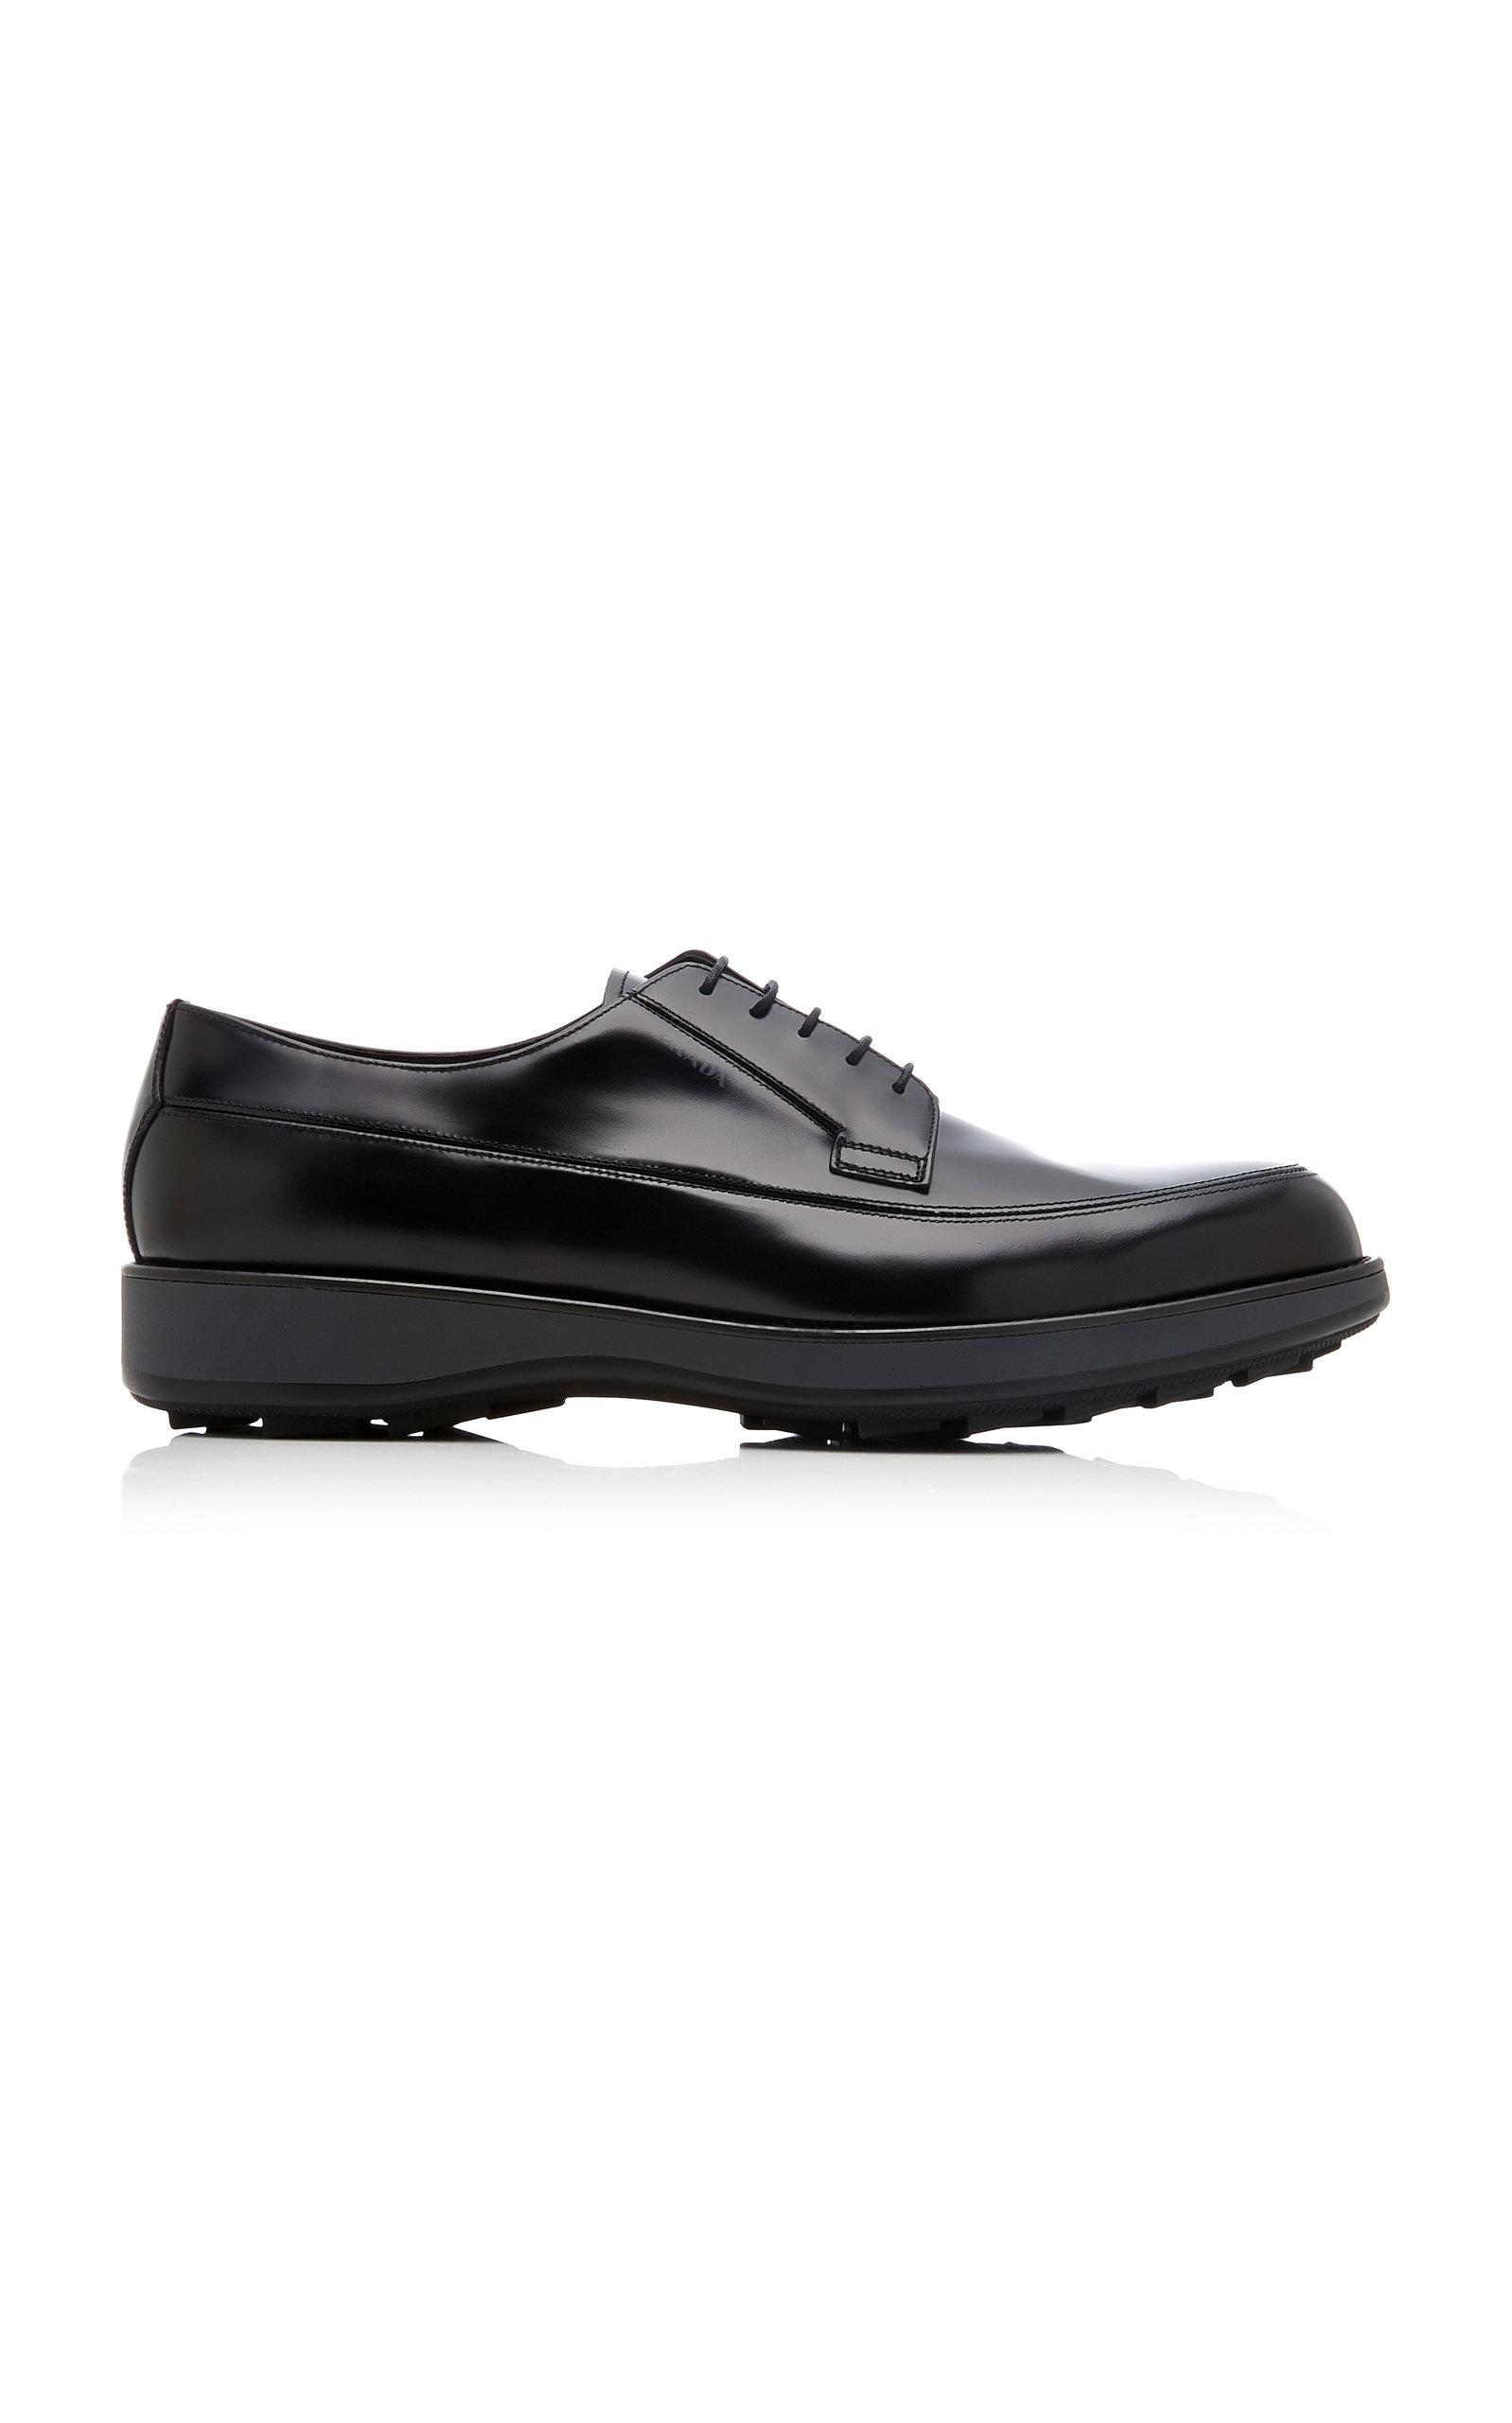 Prada Spazzolato Rois Leather Derby Shoes in Black for Men - Lyst